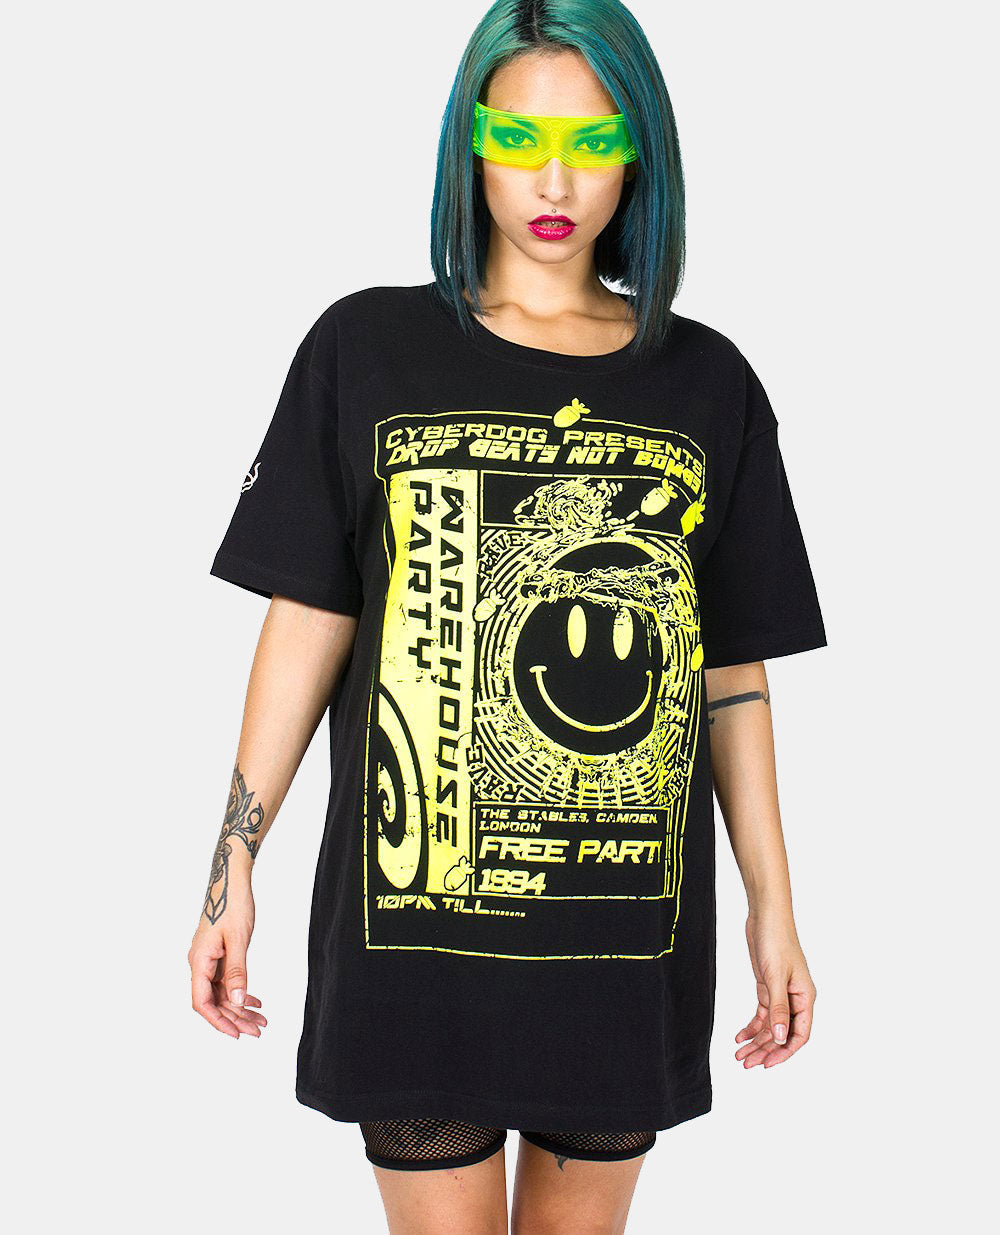 OVERSIZE WAREHOUSE PARTY T-SHIRT